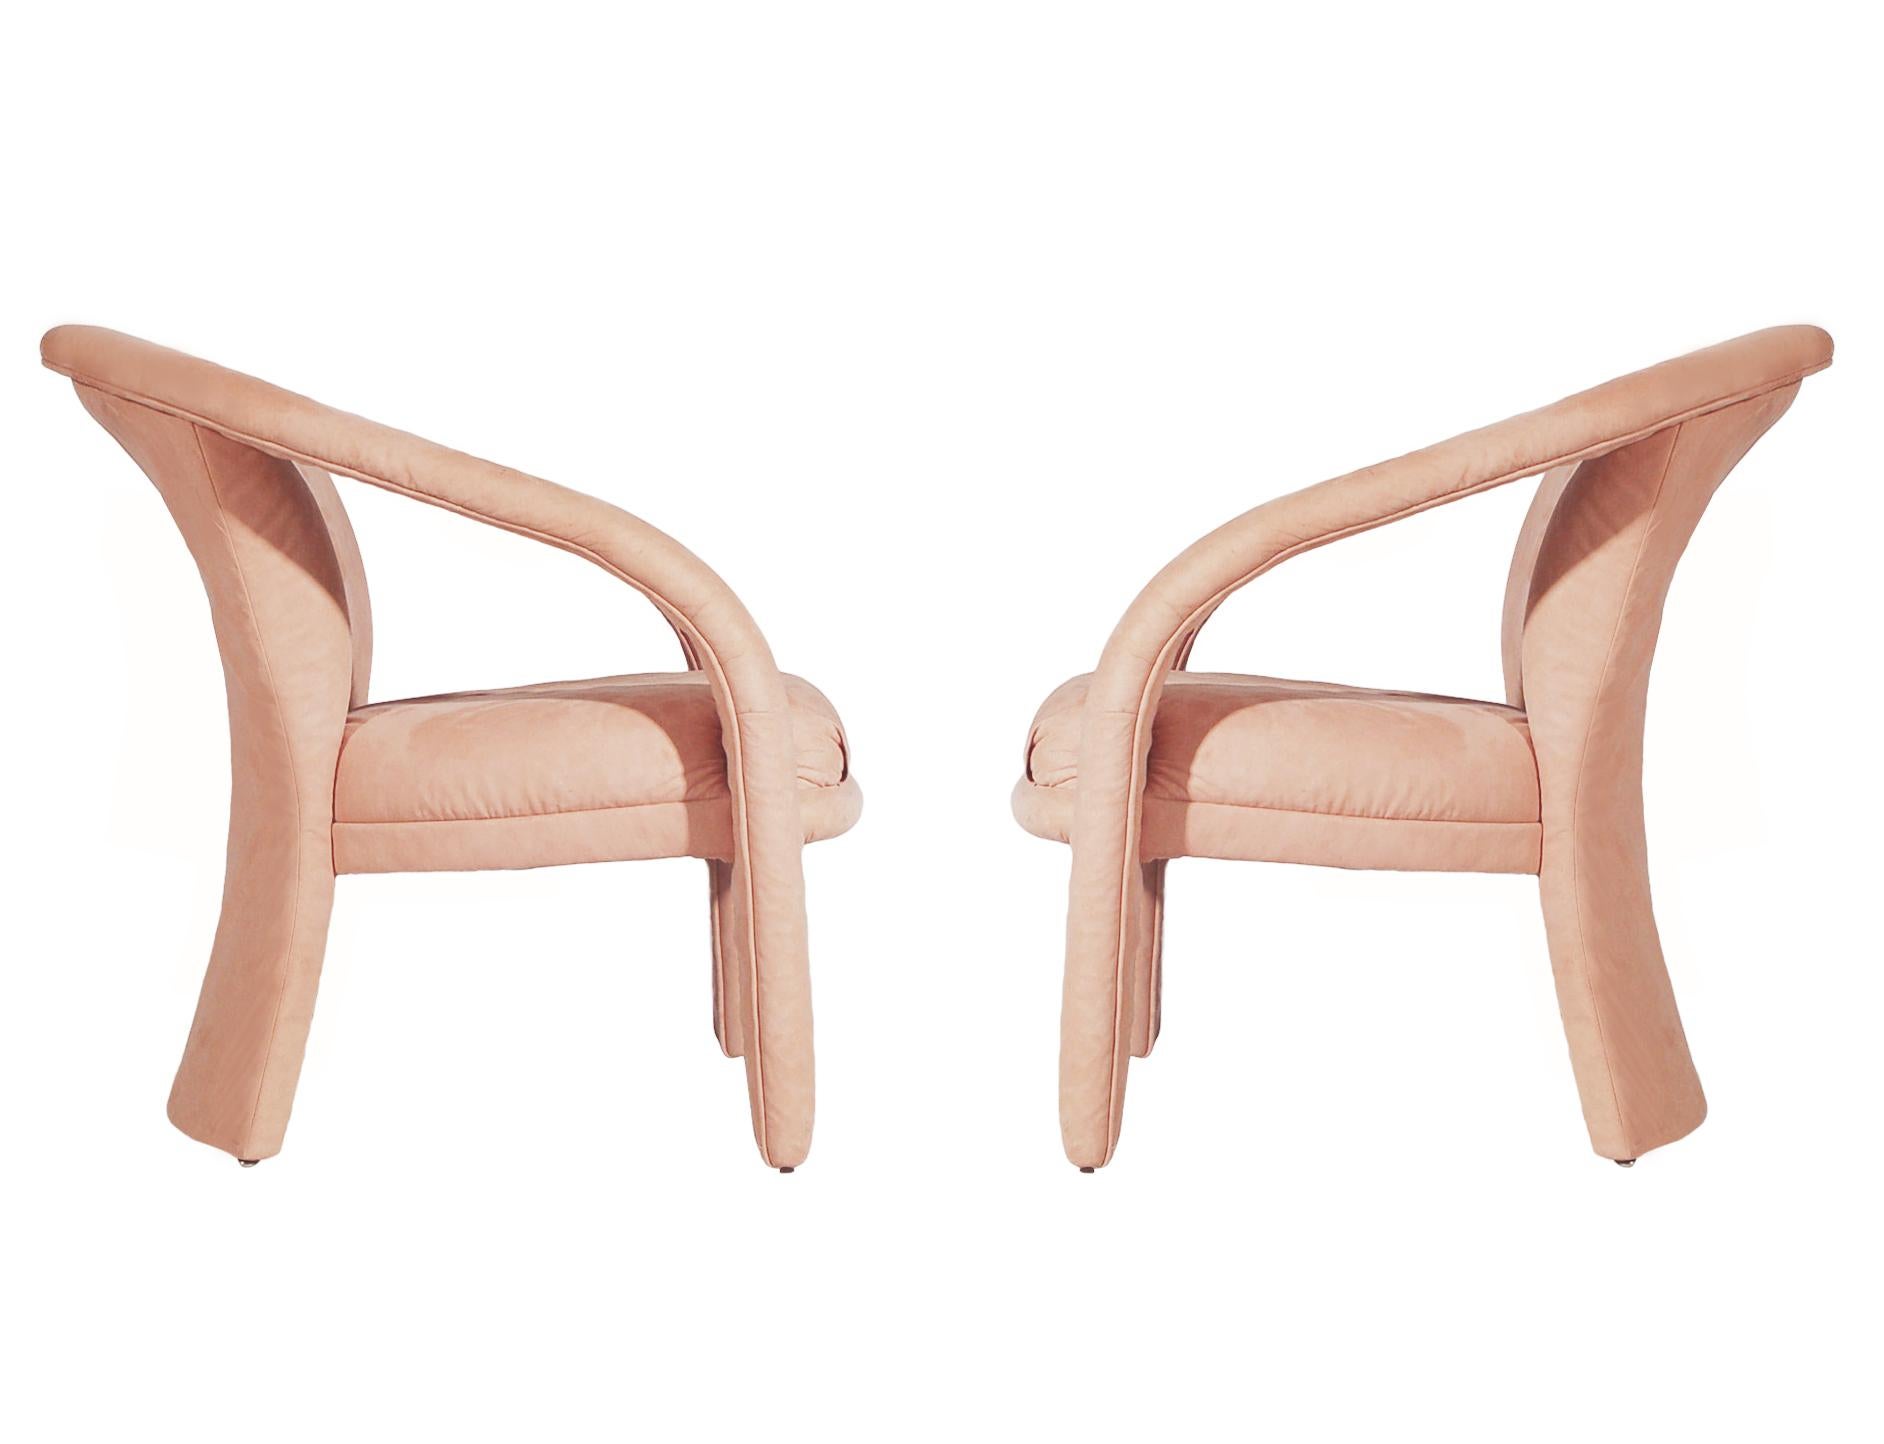 Pair of Decorator Mid Century Post Modern Armchair Lounge Chairs in Blush Pink For Sale 1